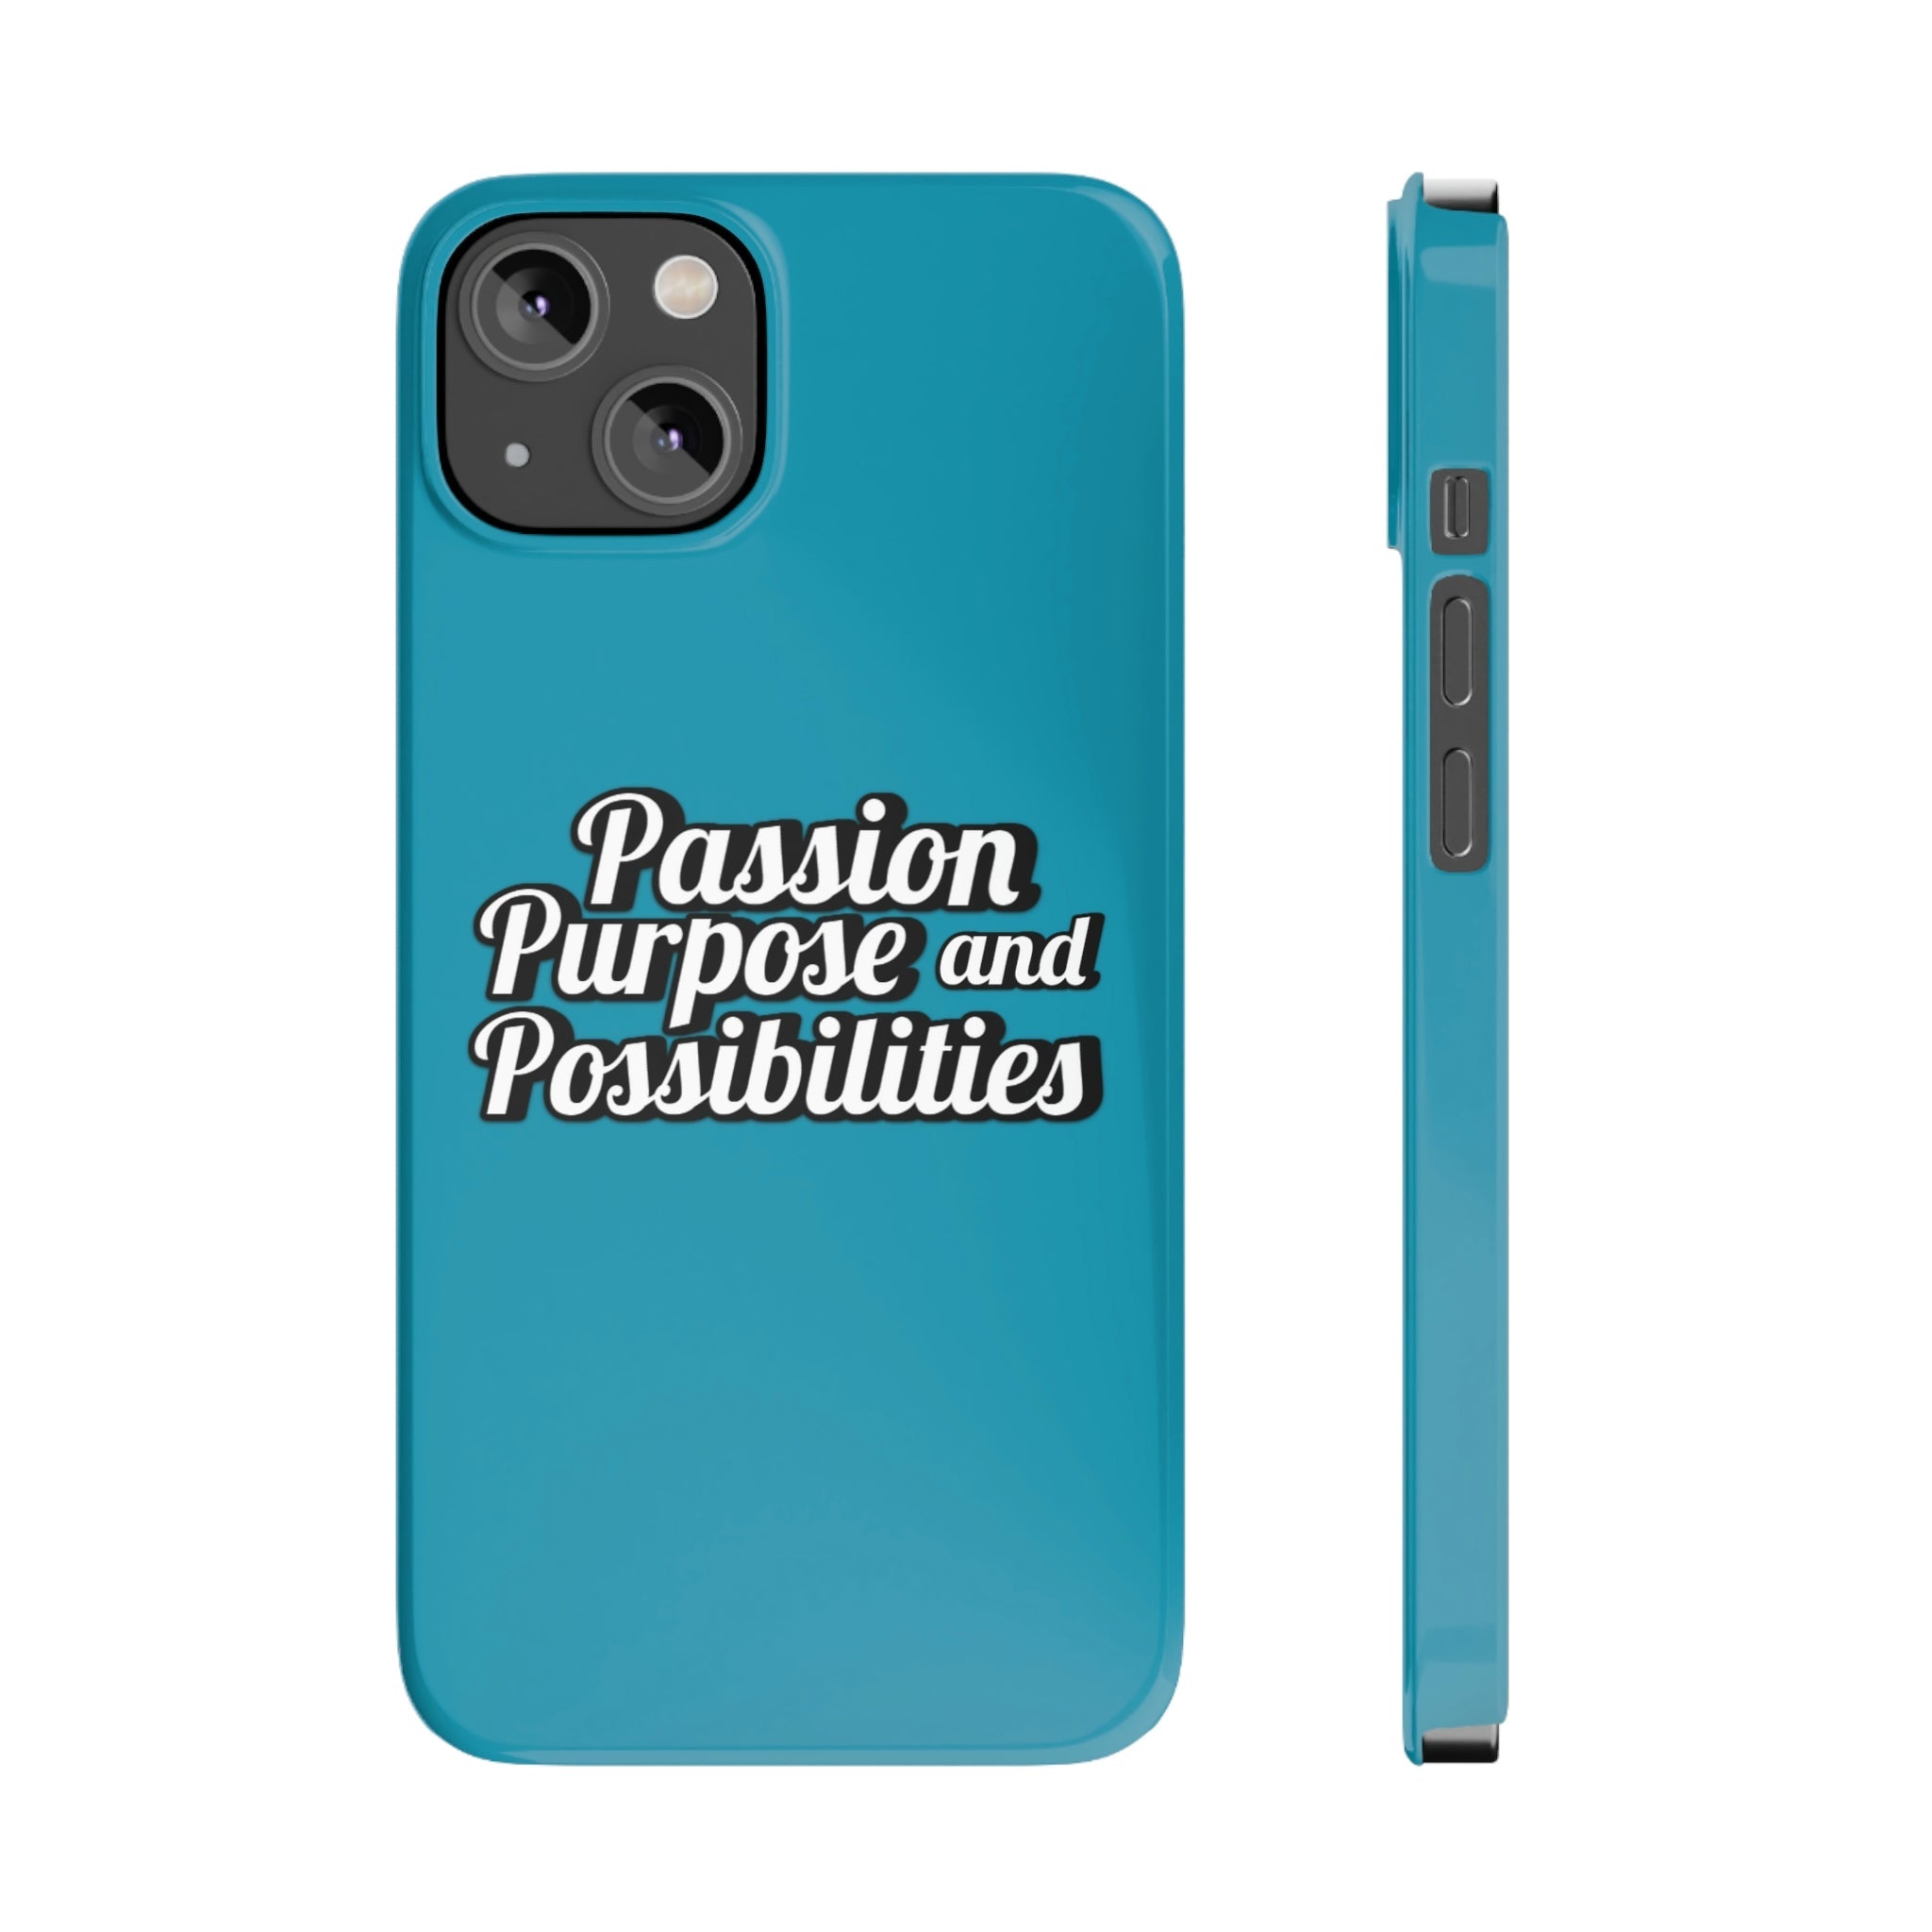 Passion Purpose and Possibilities Slim Phone Cases - The Kindness Cause